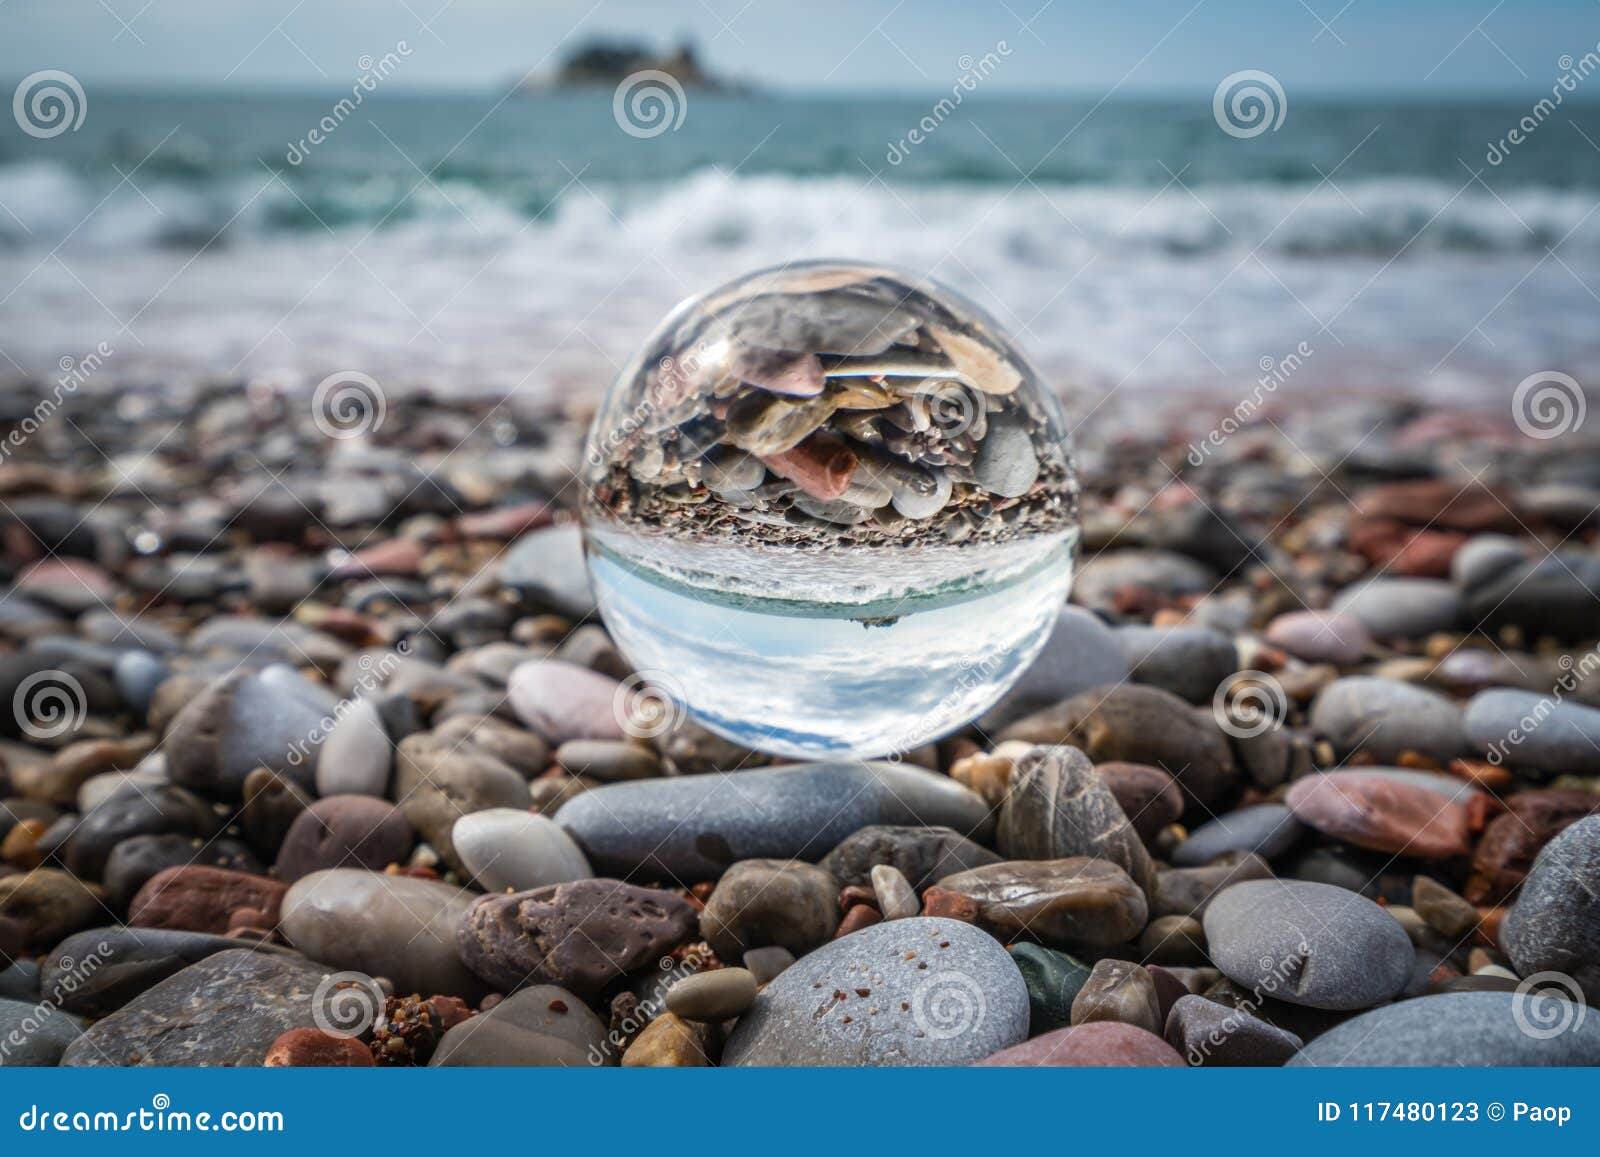 Beach Peebles Reflected in a Glass Ball Stock Image - Image of coastal,  buildings: 117480123